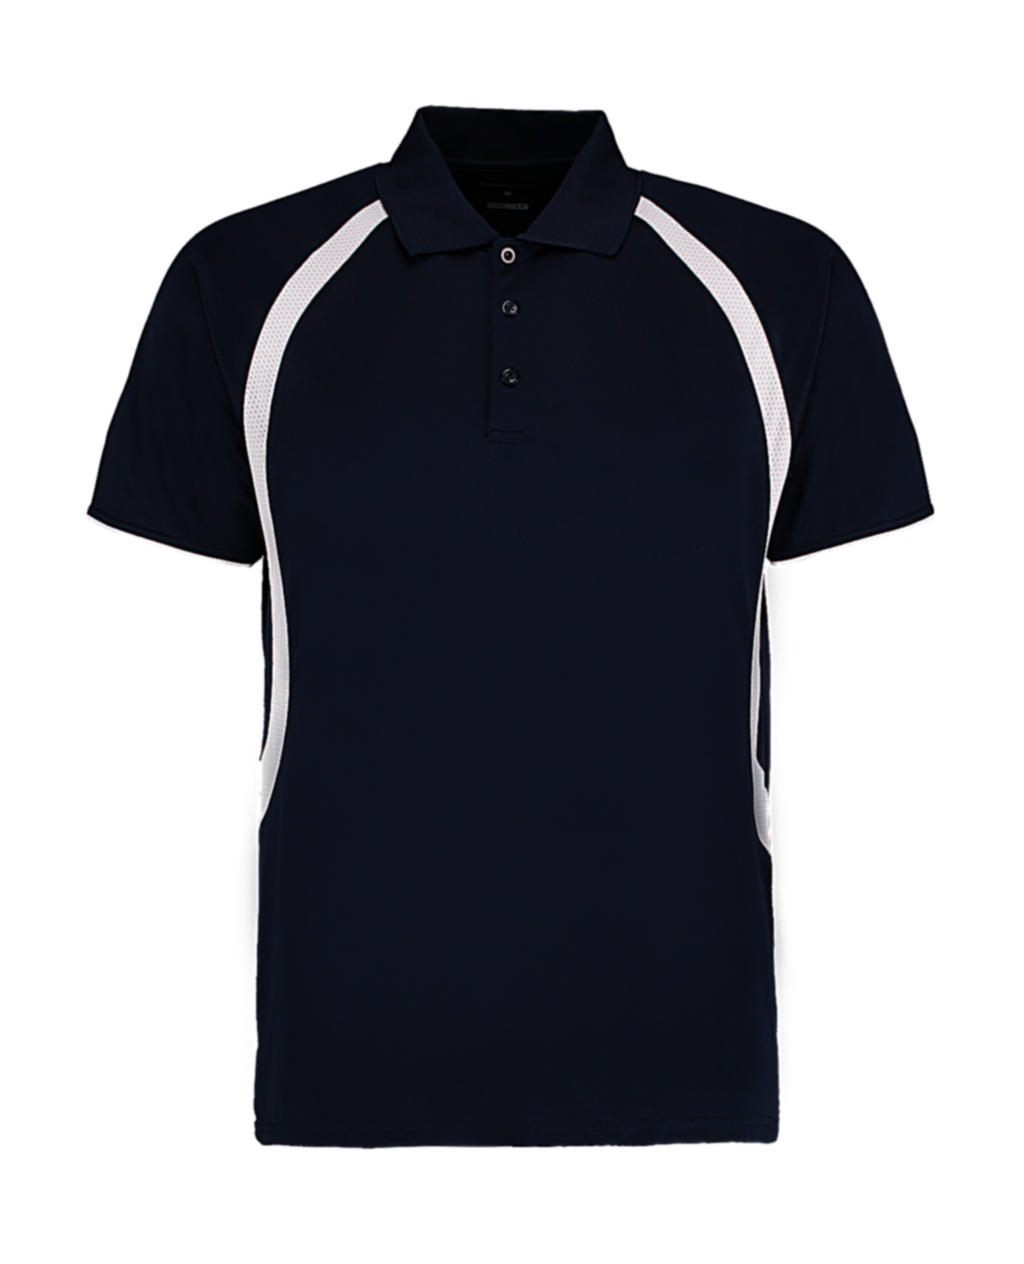  Classic Fit Cooltex? Riviera Polo Shirt in Farbe Navy/White